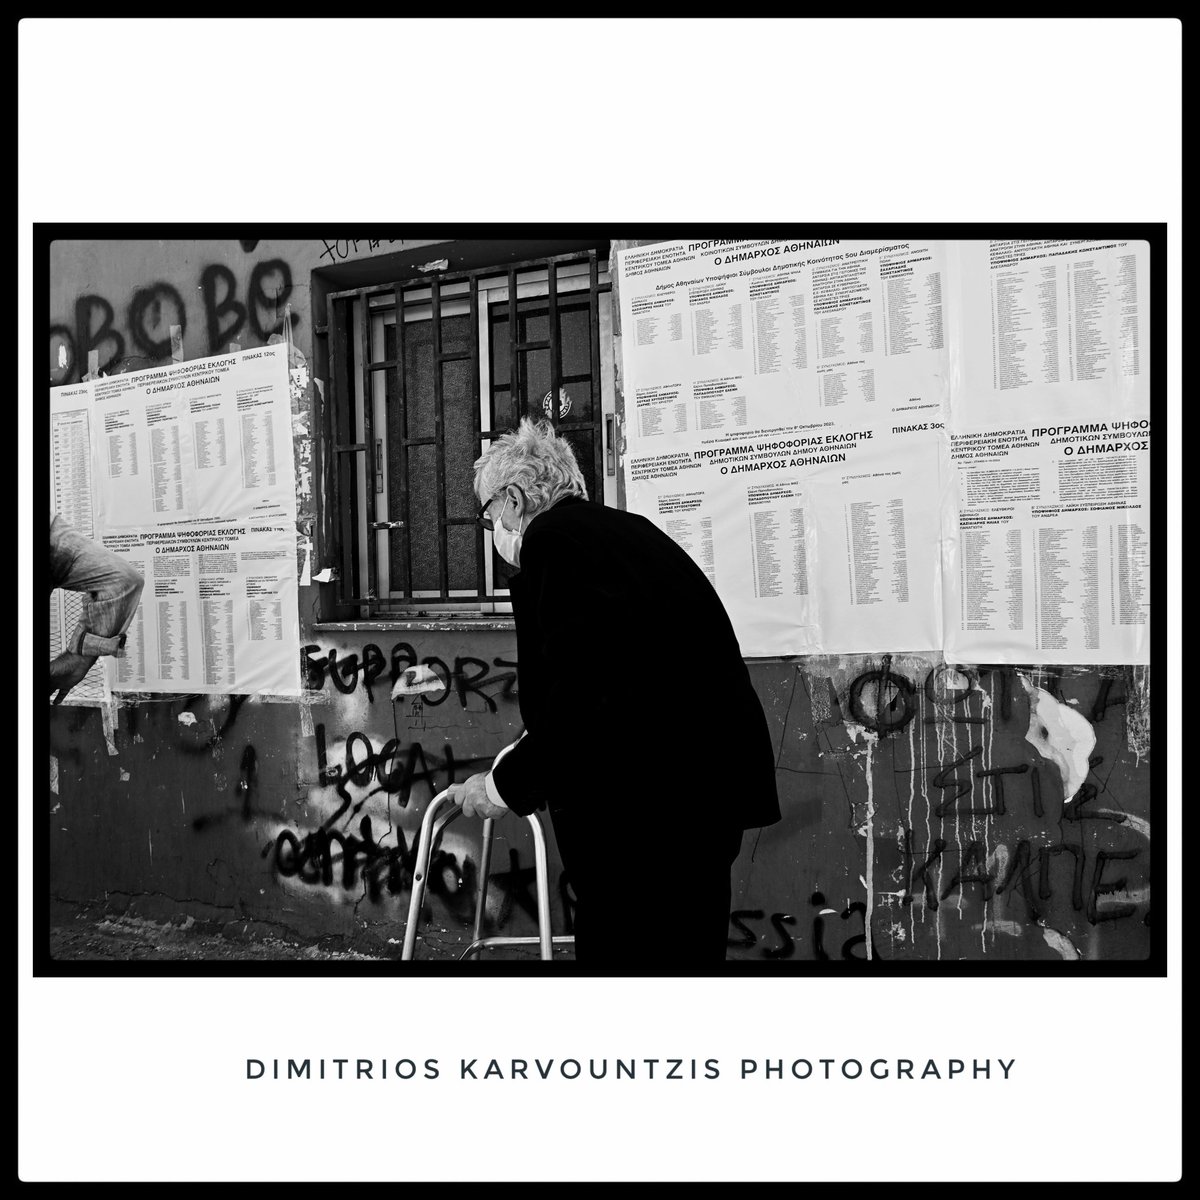 'Effort for once more voting time'

#greece #politics #municipal #municipality #vote #voting #election #elections #cityelections #bwphotography #documentaryphotography #pressphotography #photojournalism #society #democracy #notinterested  #allrightsreserved©️